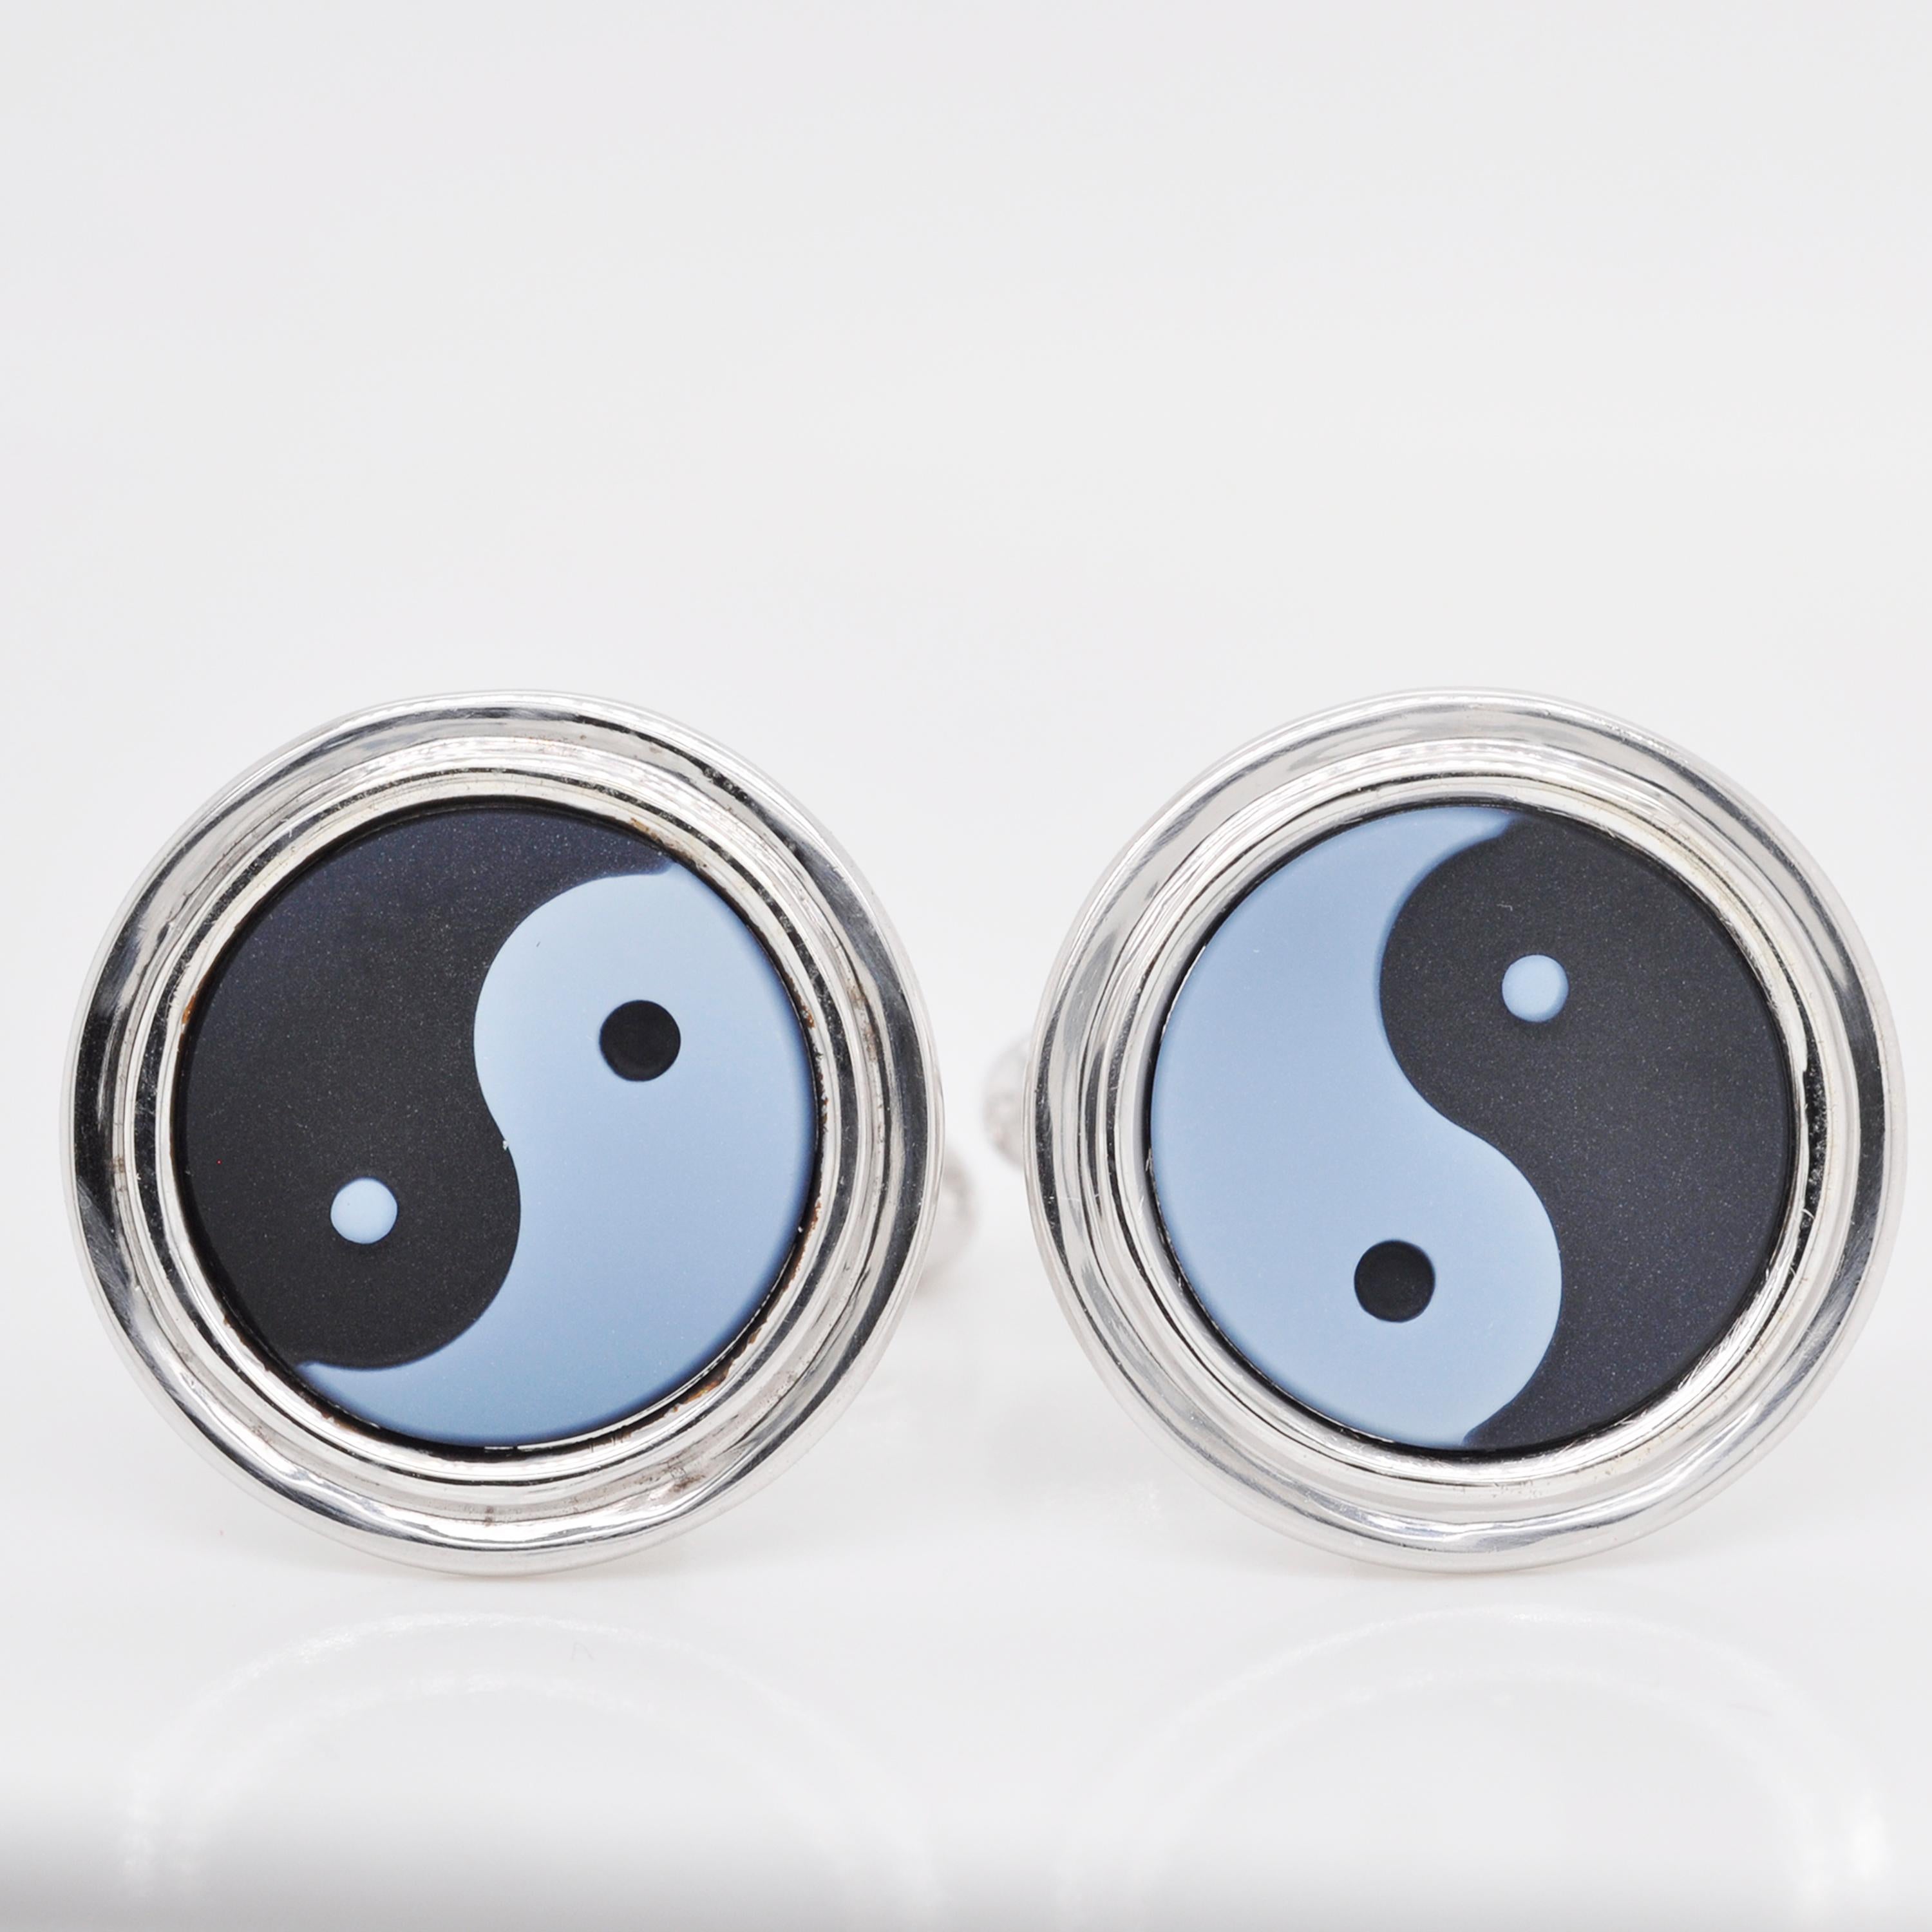 Mens Executive Cufflinks Contemporary Yin and Yang Light and Darkness Chinese Symbol Cuff Links 